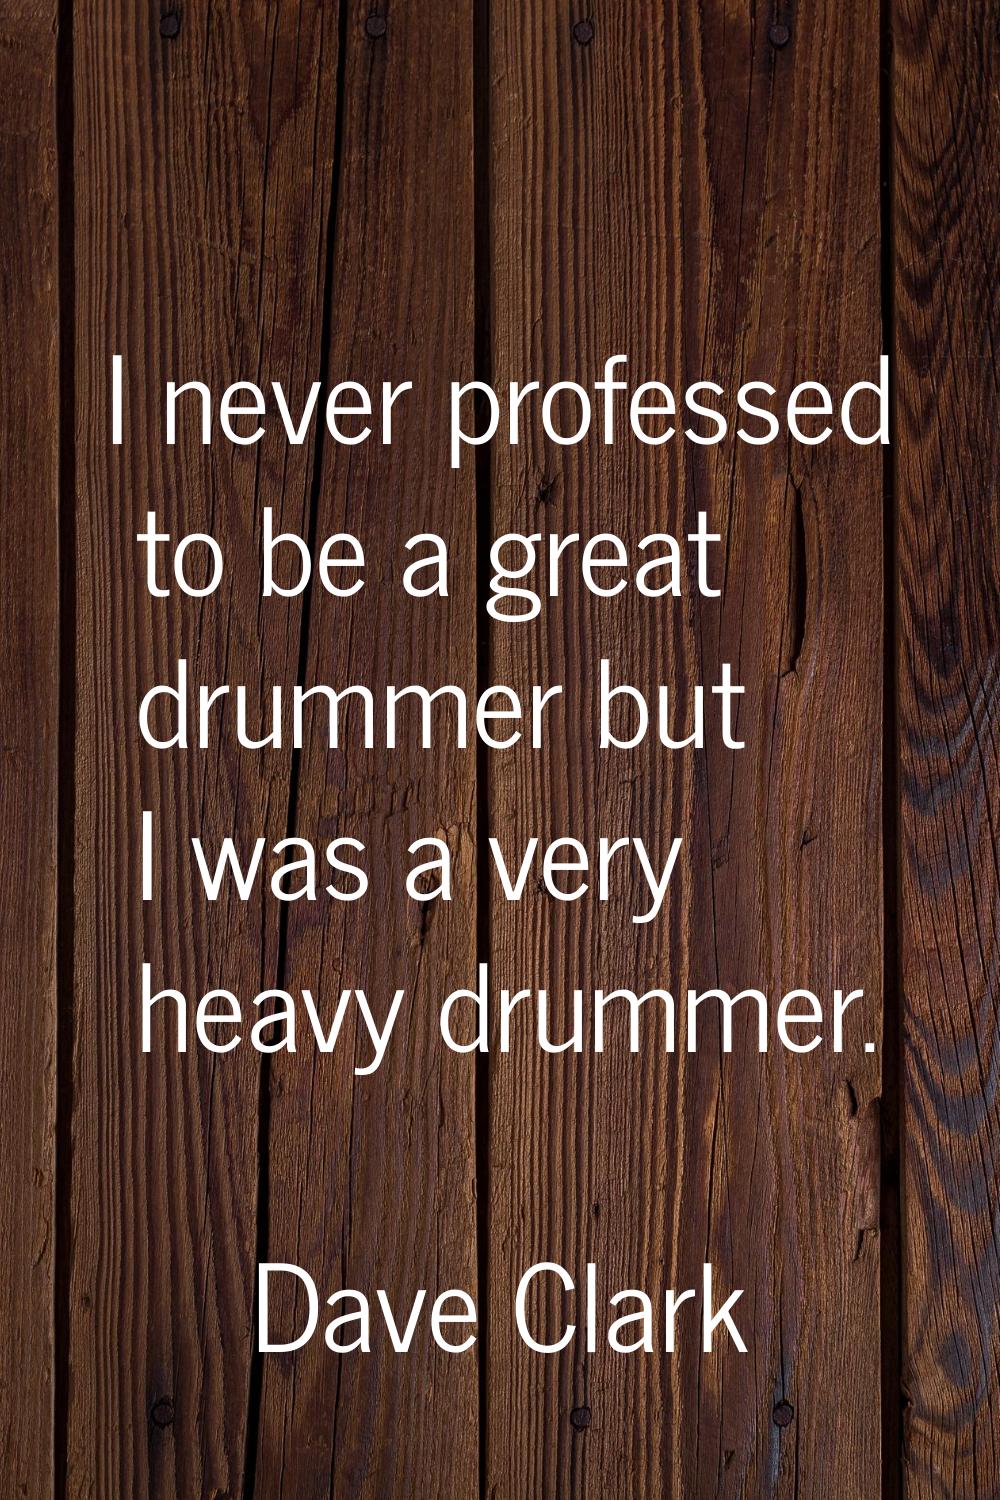 I never professed to be a great drummer but I was a very heavy drummer.